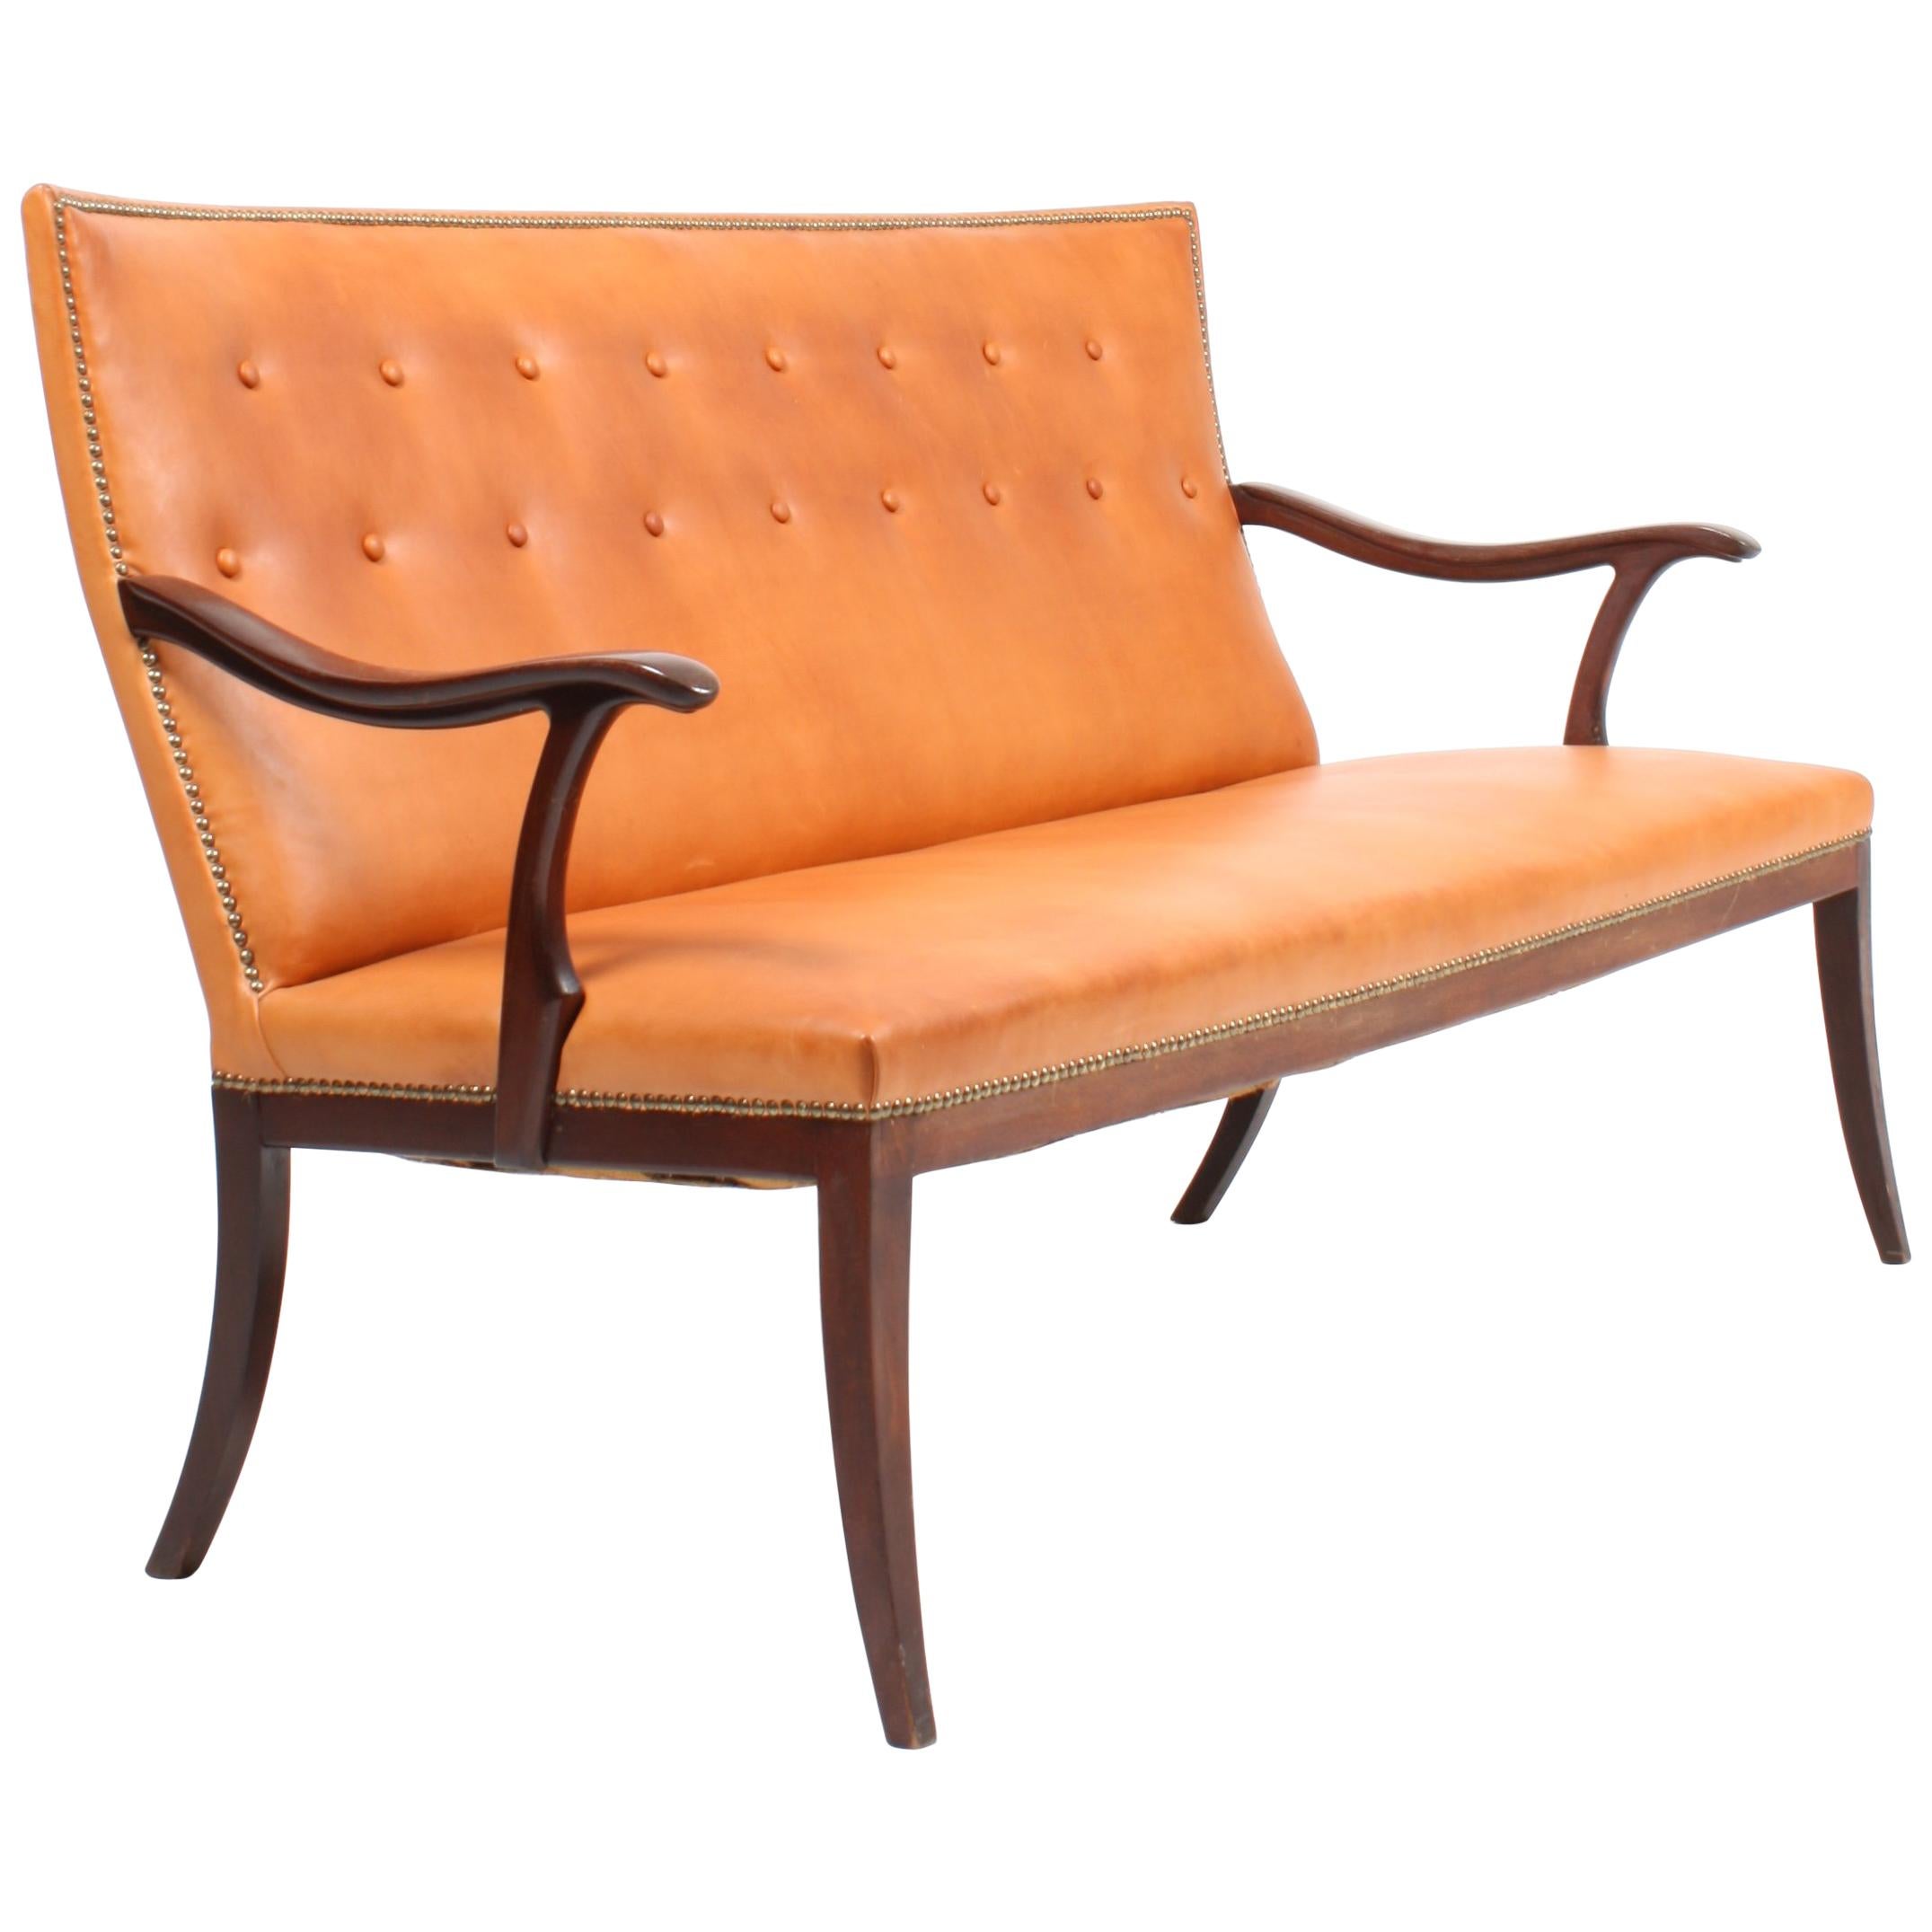 Sofa in Patinated Leather by Cabinetmaker Frits Hennigsen Made in Denmark, 1940